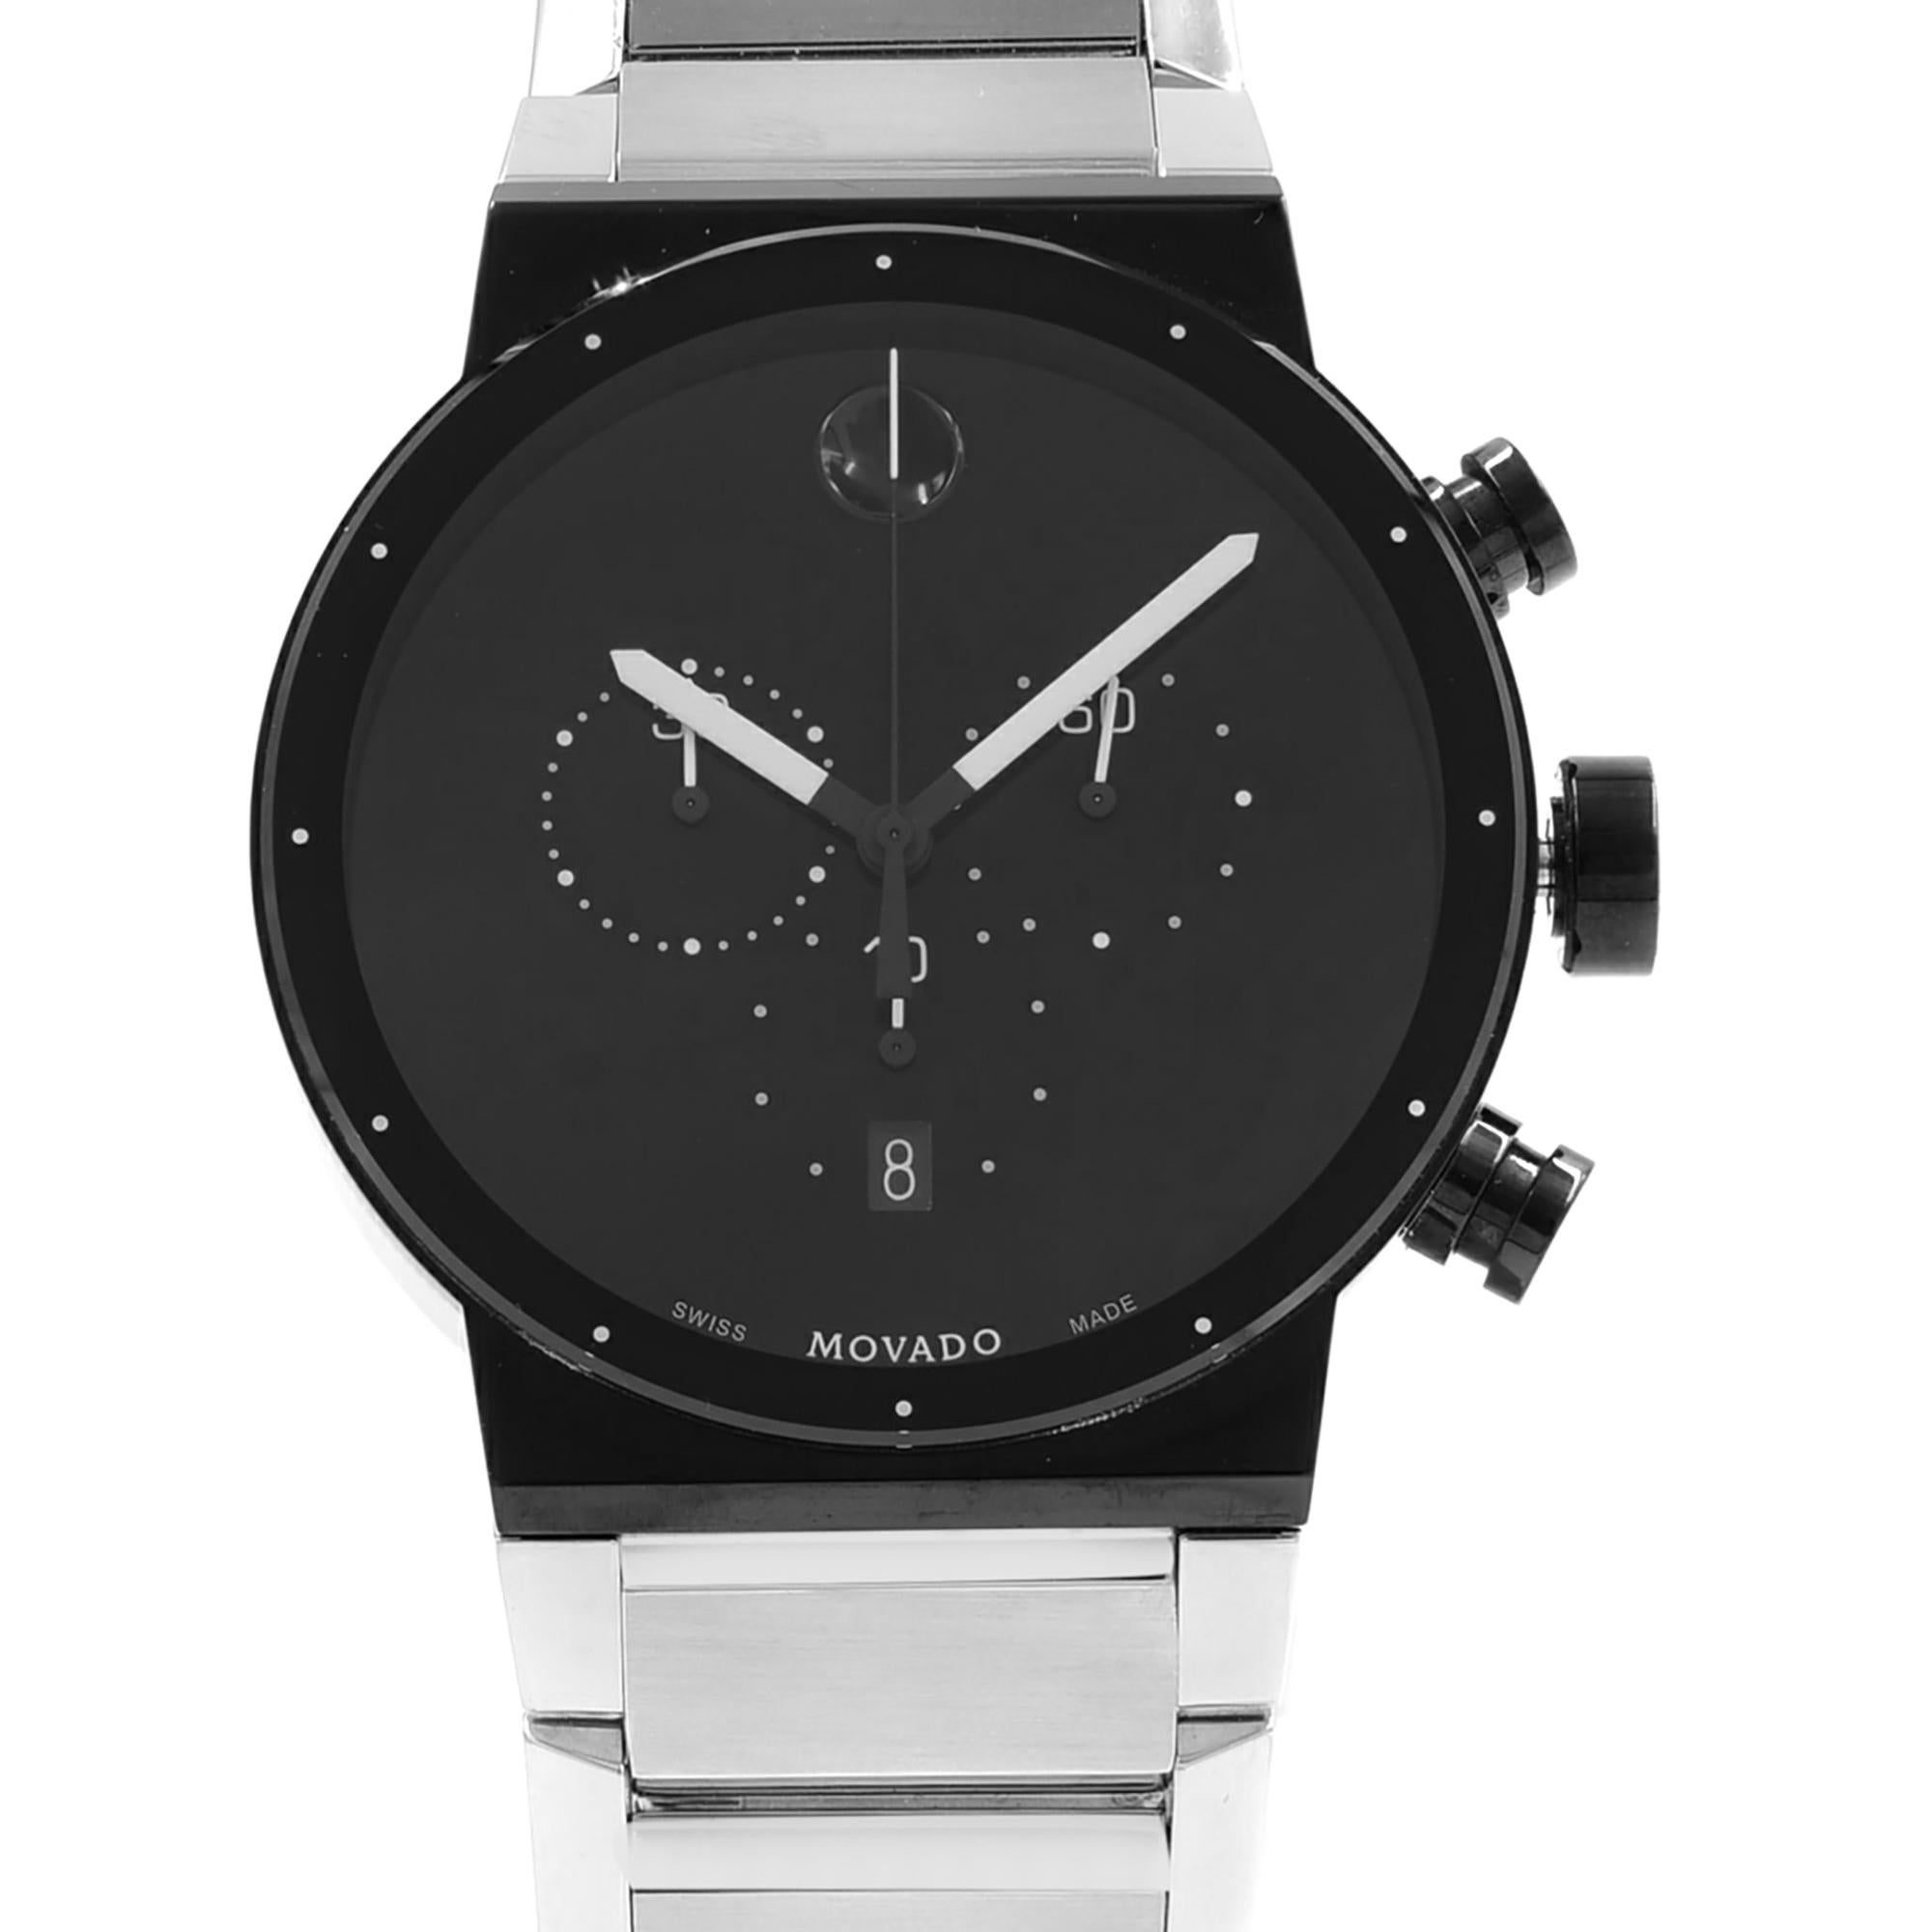 Store Display Model Movado Synergy Museum Chronograph Steel Black Dial Quartz Men's Watch 0606800. The Timepiece Might Have Insignificant Blemishes Due To Store Handling. Original Box and Papers are Included. Covered by 3-year Chronostore